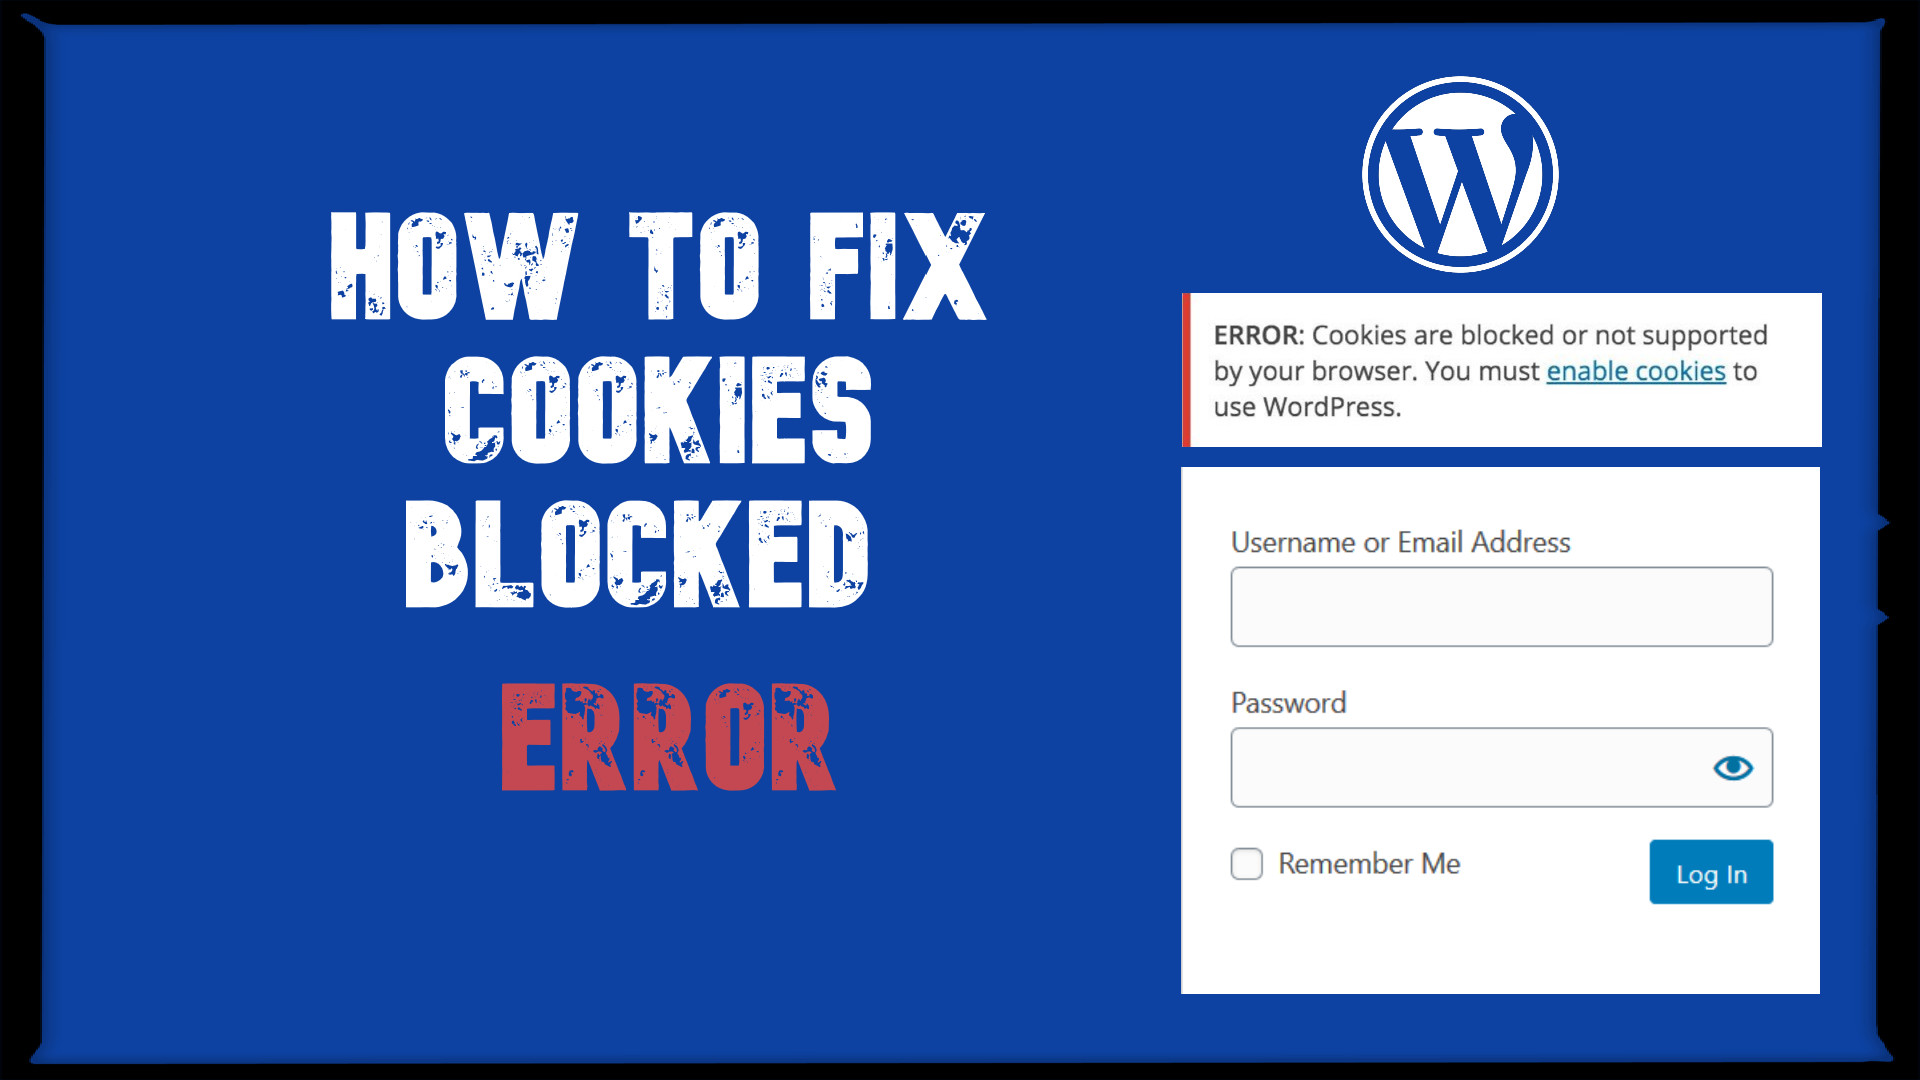 ERROR: Cookies are blocked or not supported by your browser